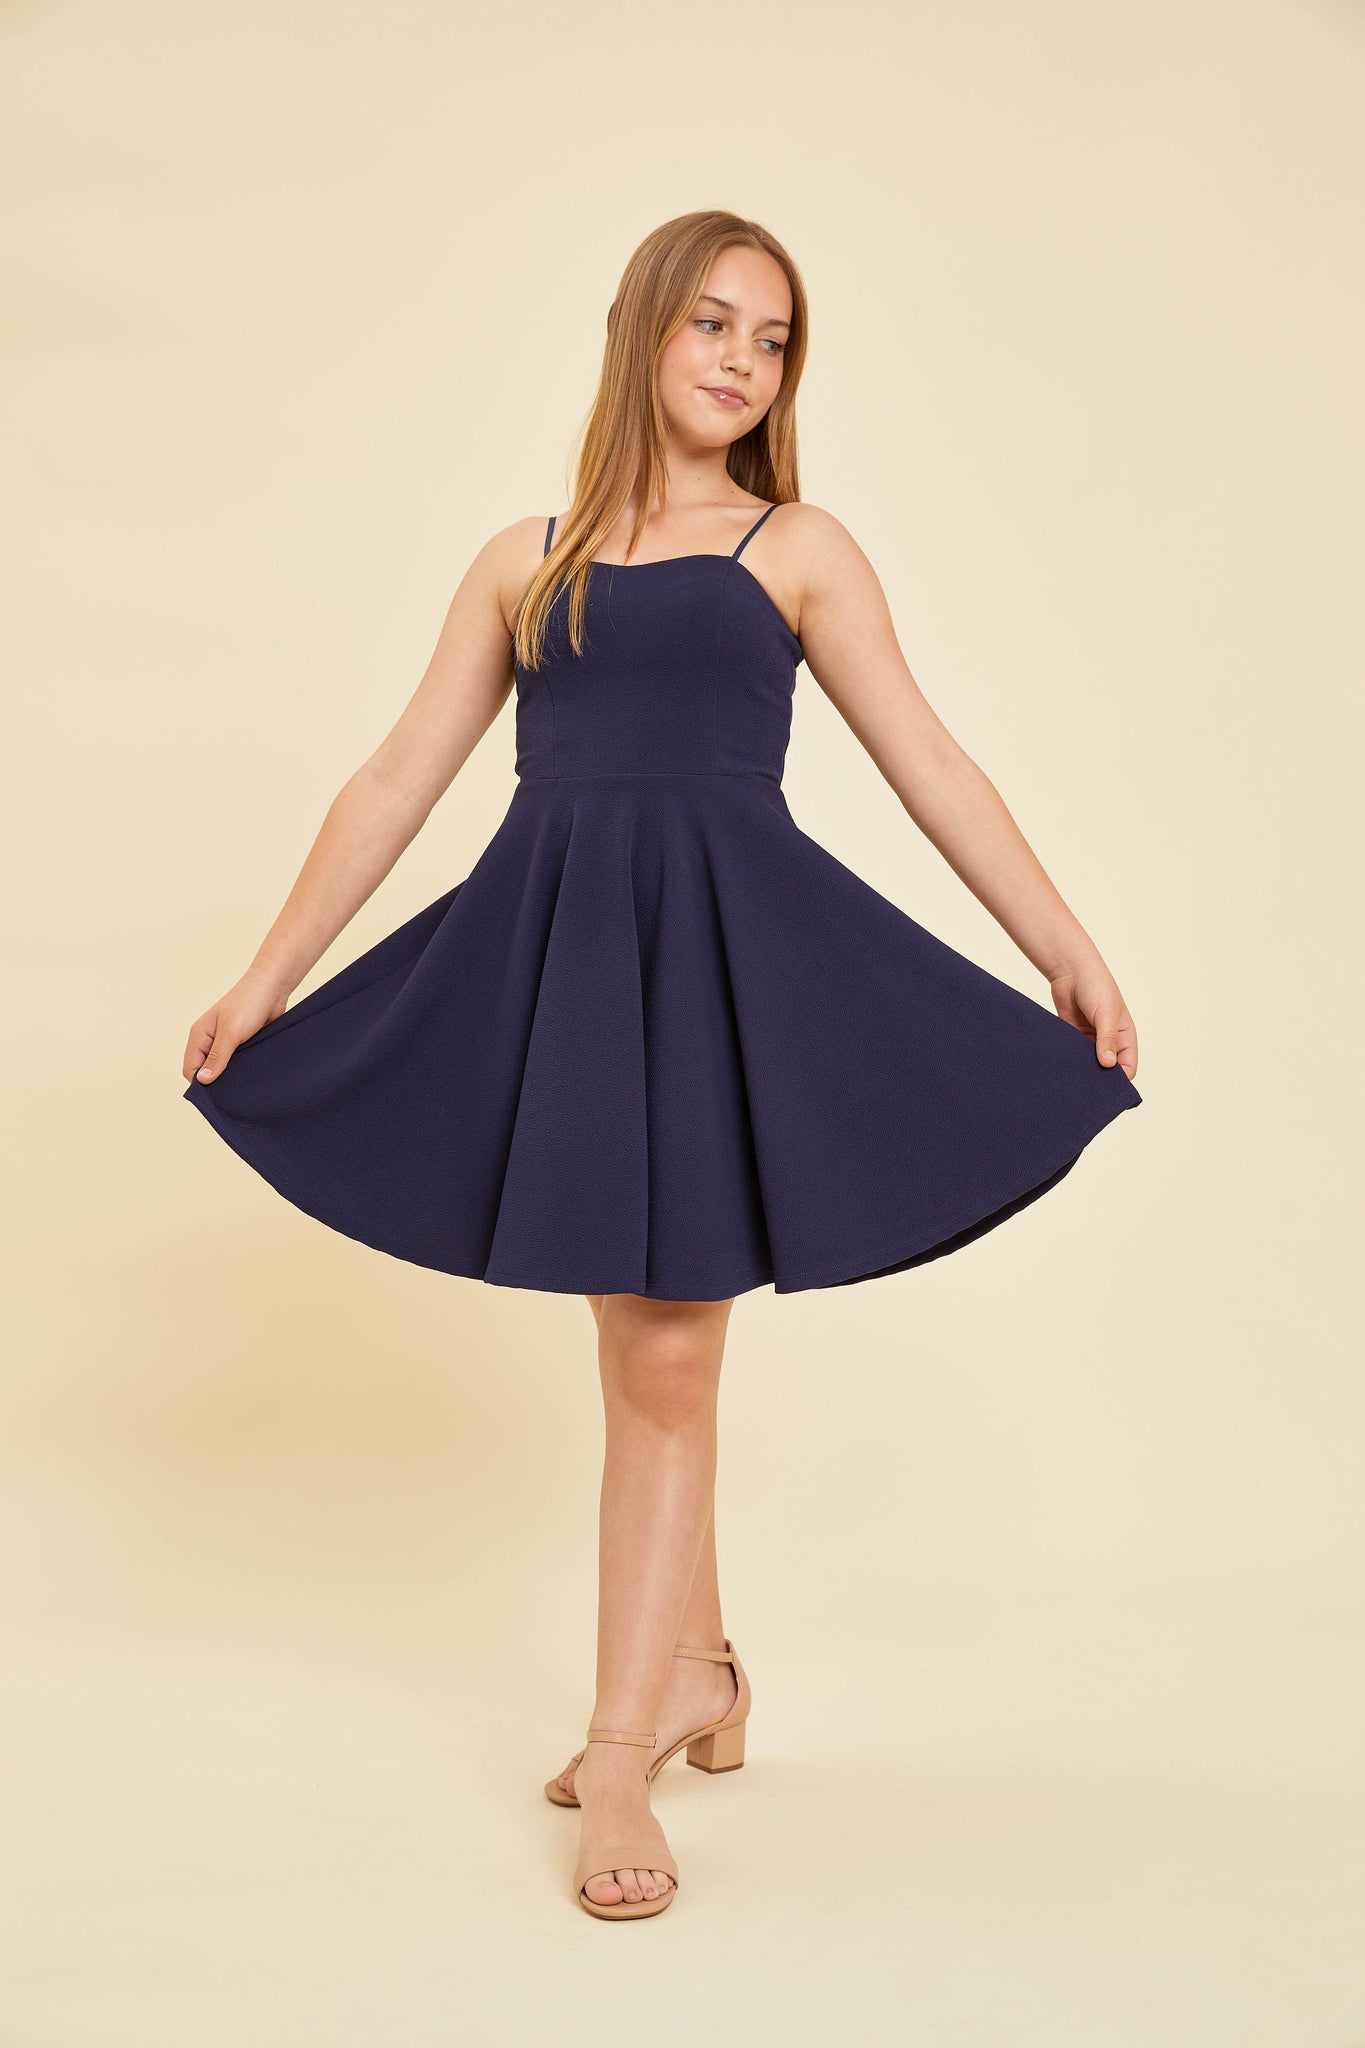 Blonde girl in a navy textured fit and flare dress.Blonde girl in a navy textured fit and flare dress back.